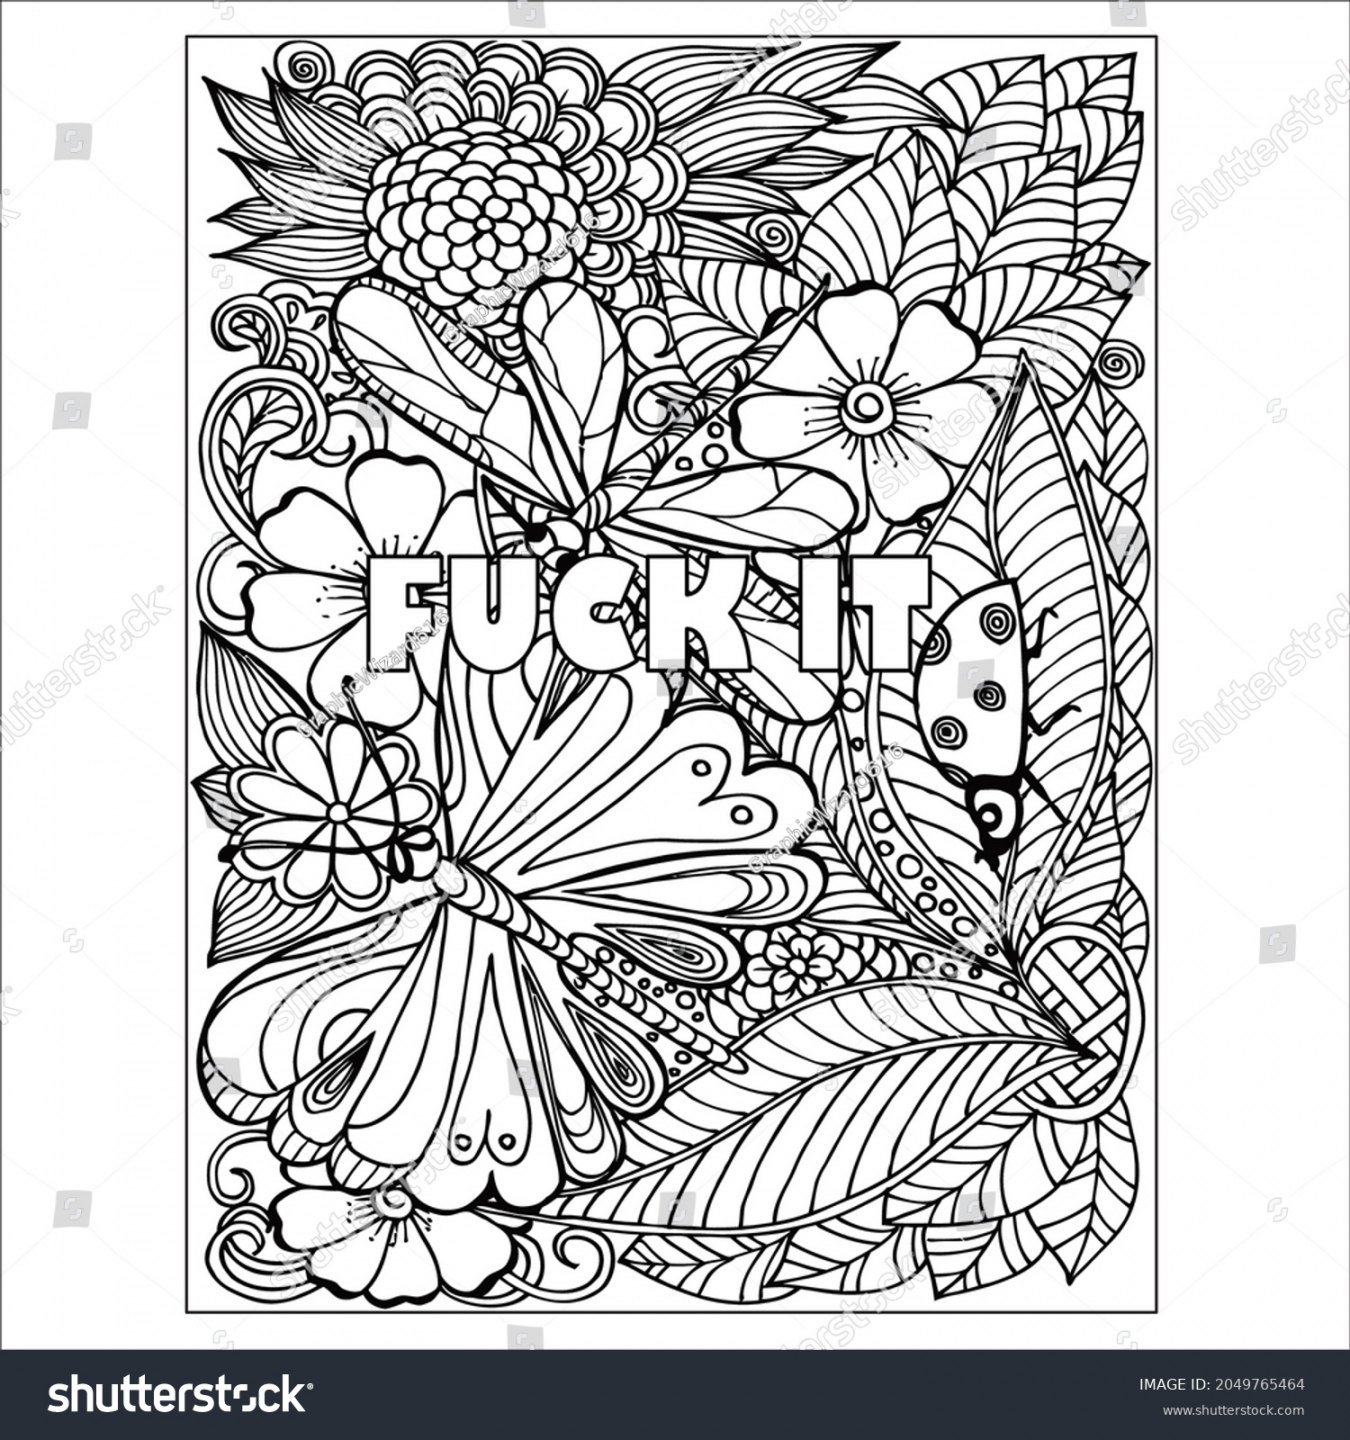 , Swear Words Coloring Images, Stock Photos & Vectors  - FREE Printables - Free Printable Inappropriate Coloring Pages For Adults